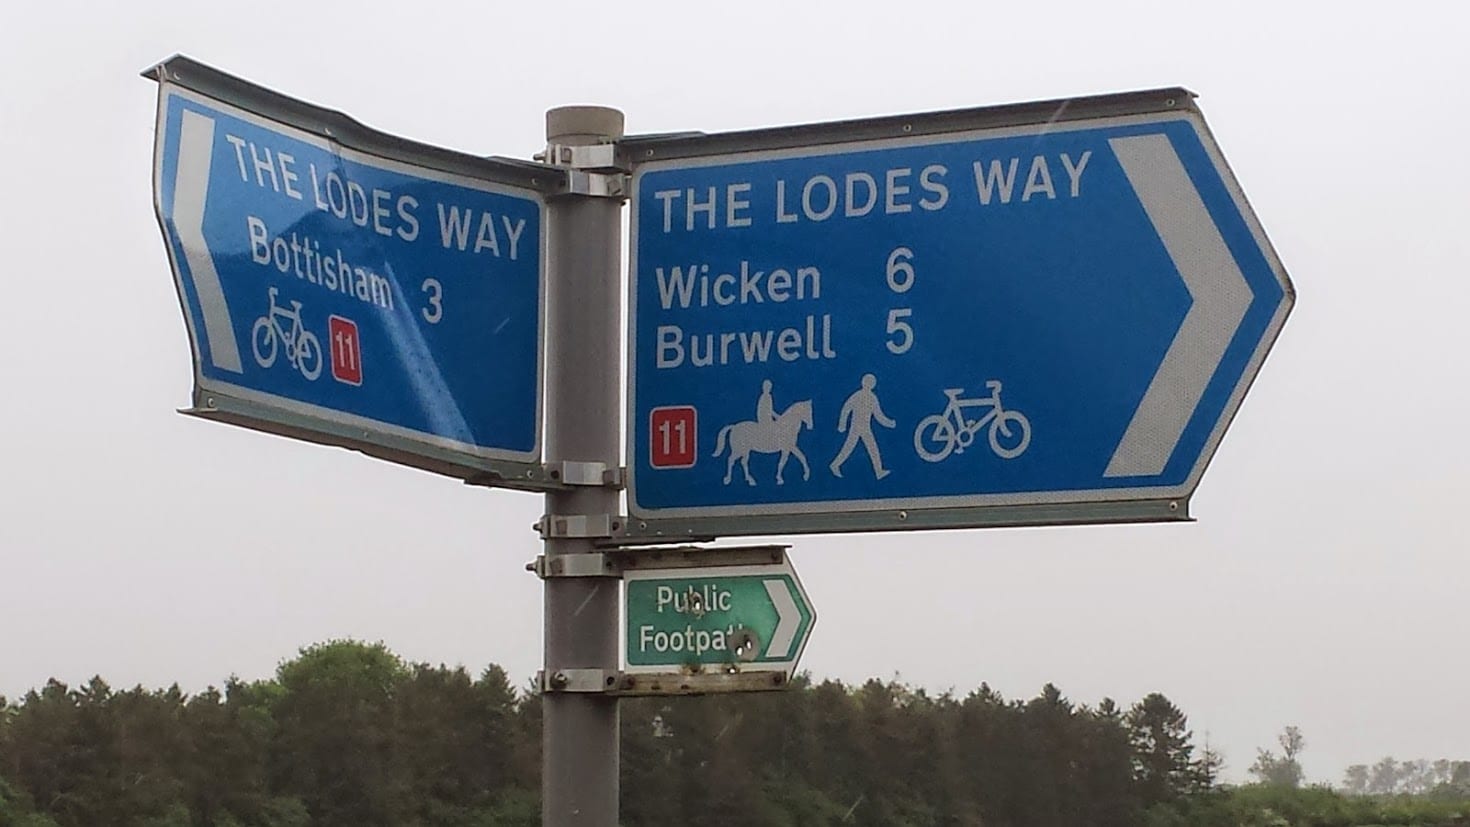 Cycling along the Lodes Way in England